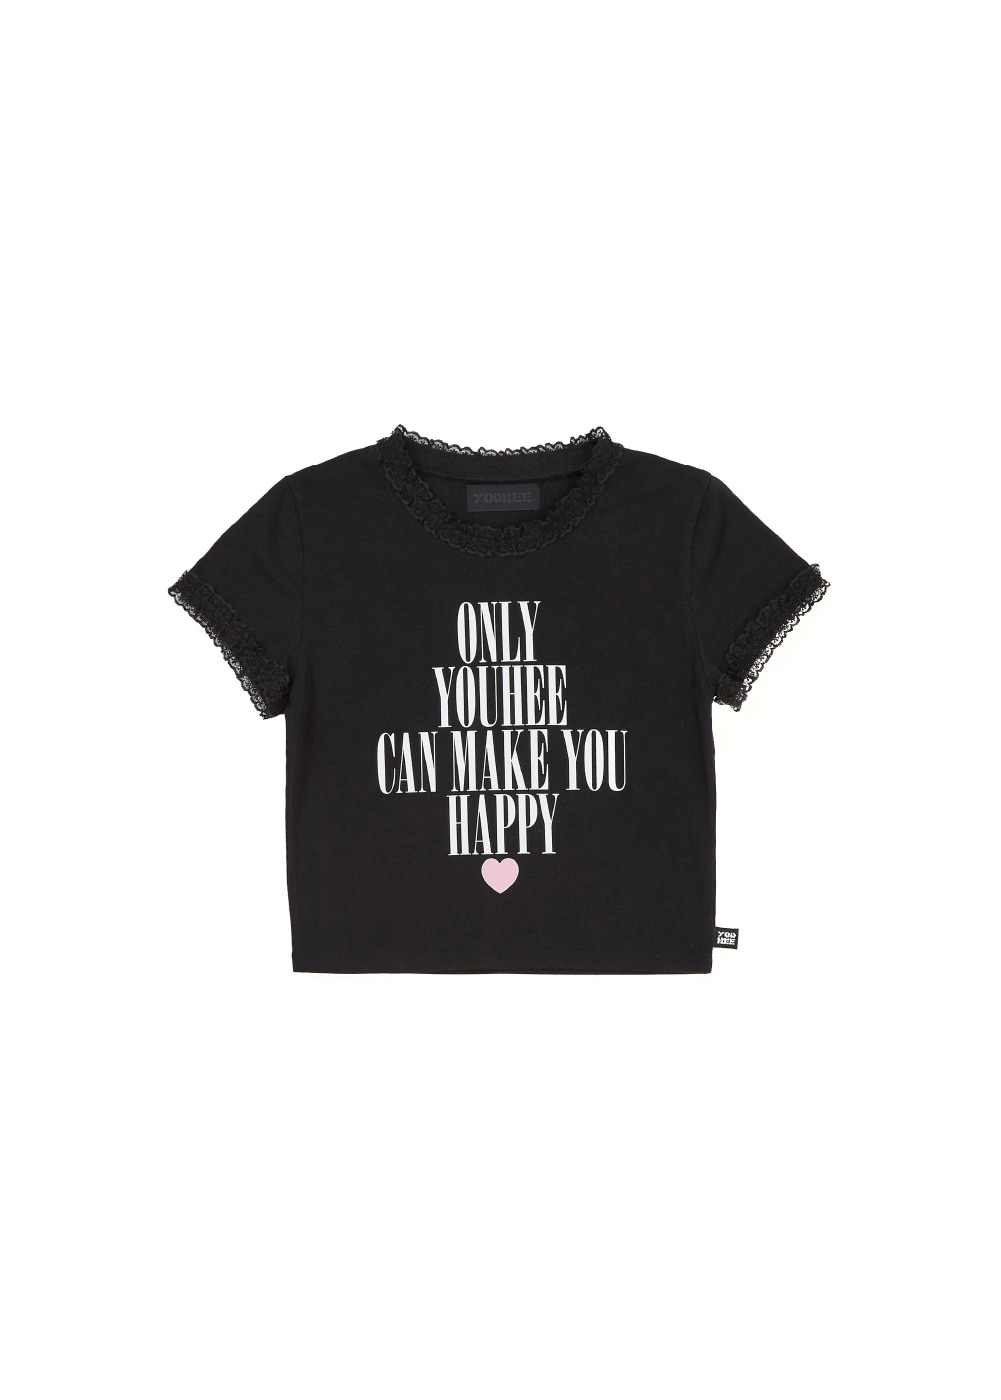 YOUHEE LACE LETTERING BABY T-SHIRTS BLACK